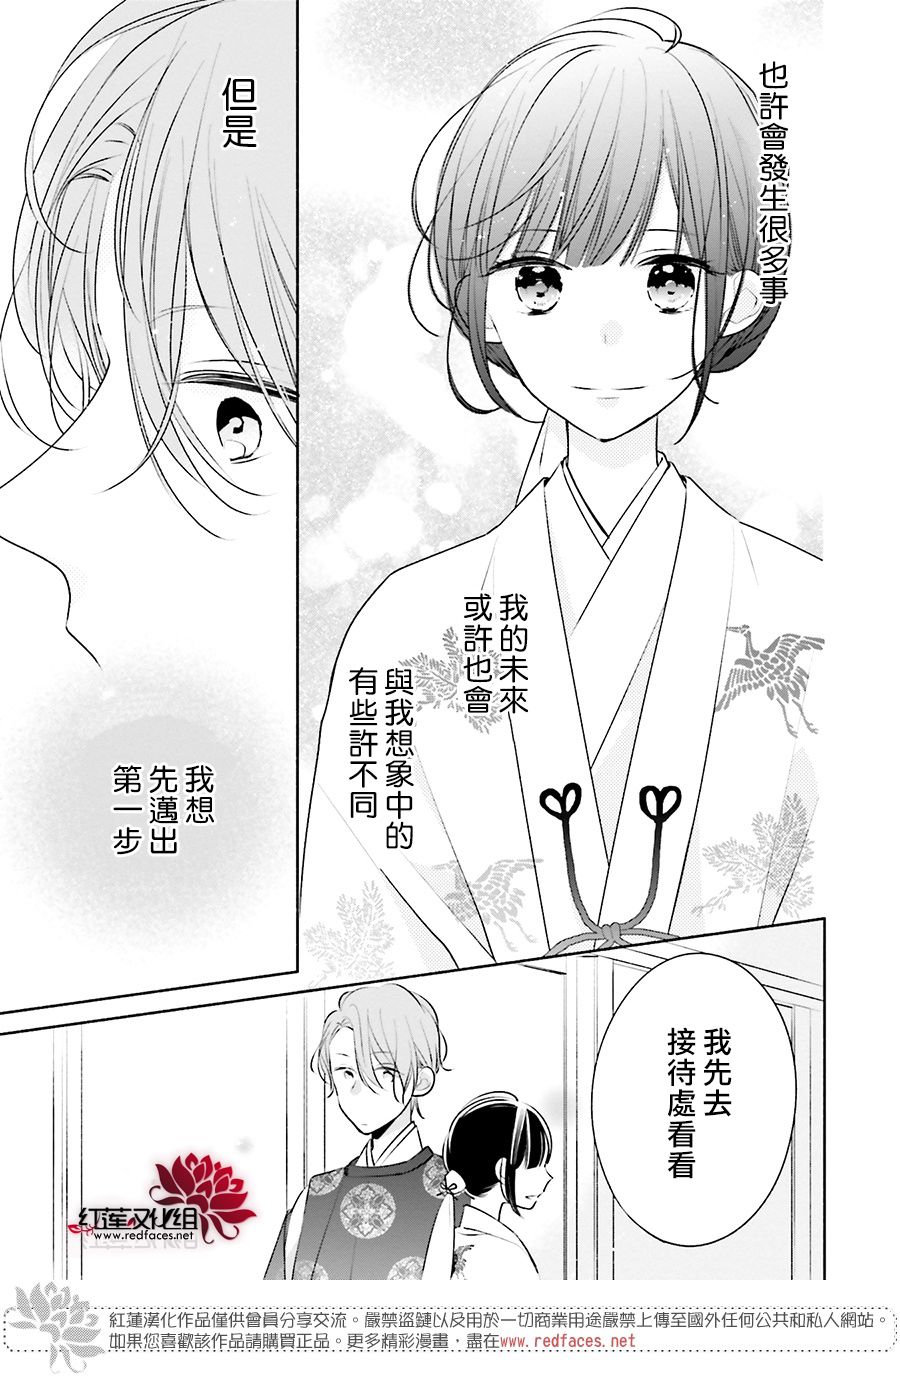 If given a second chance - 27話 - 3